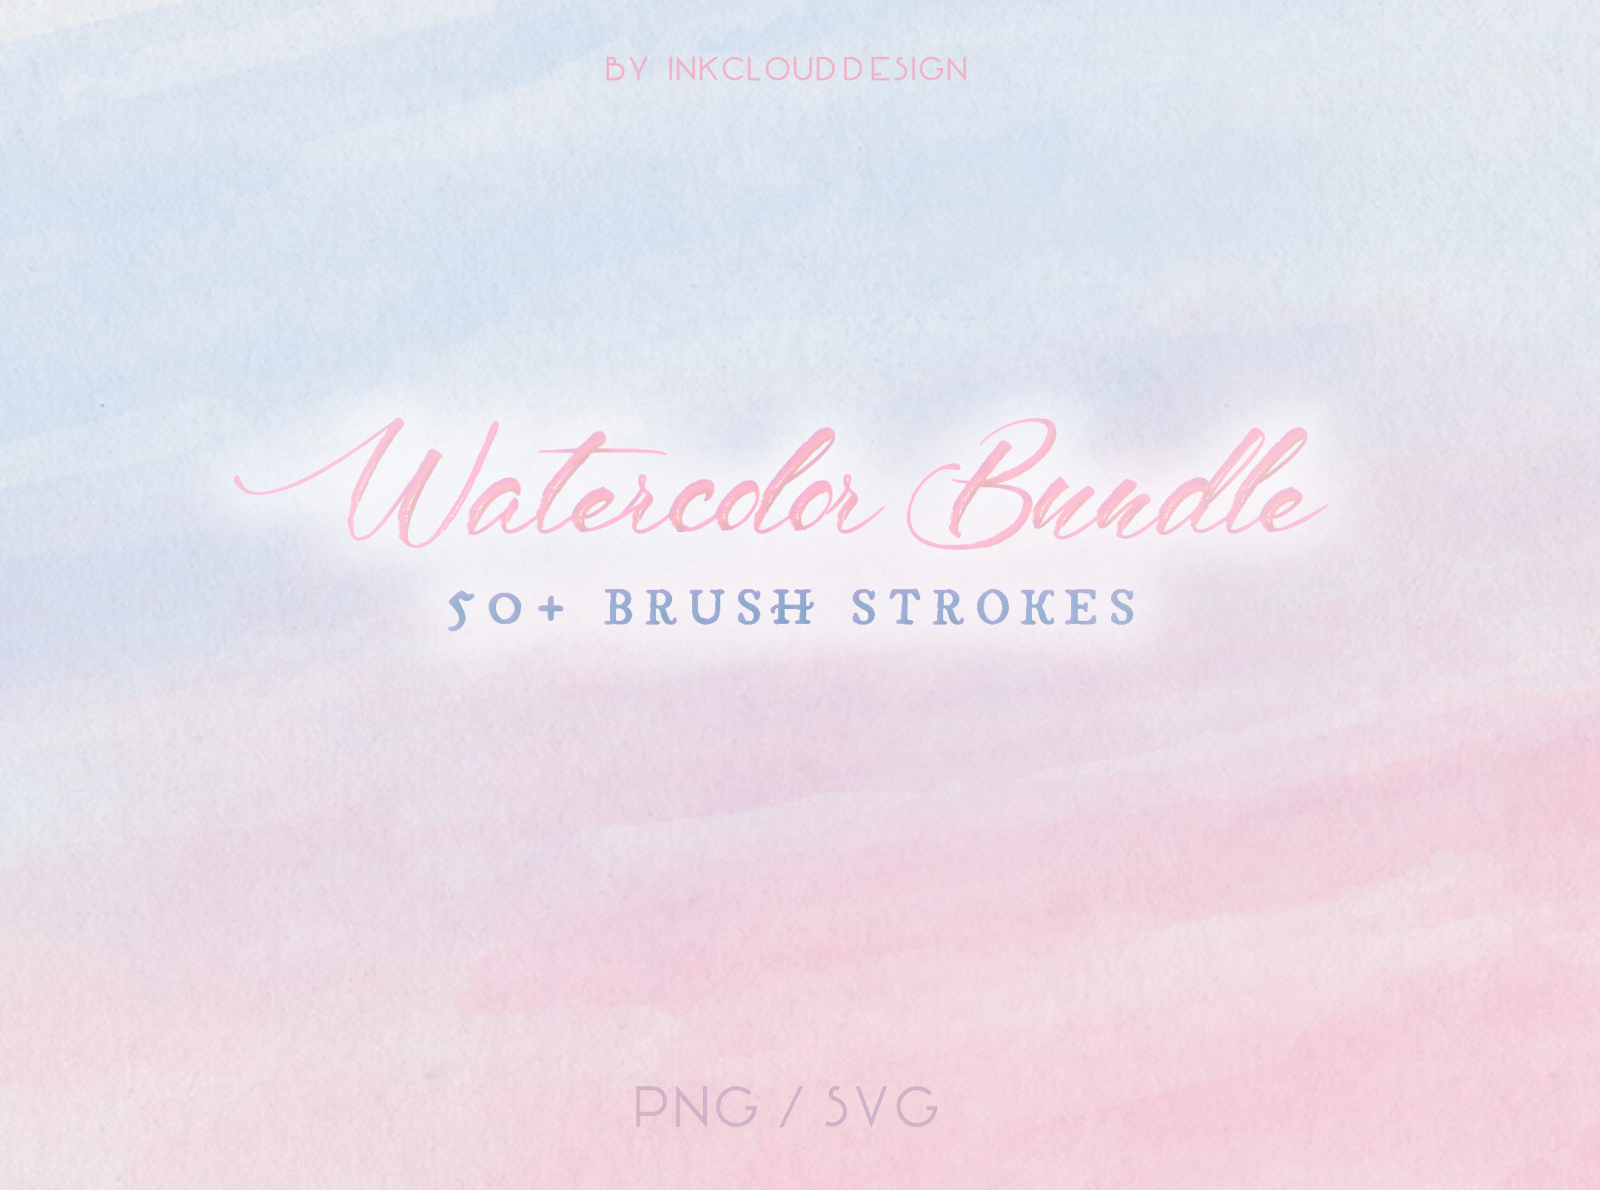 Download Watercolor Design Bundle 50 Vector Brush Strokes Png Svg By Inkclouddesign On Dribbble